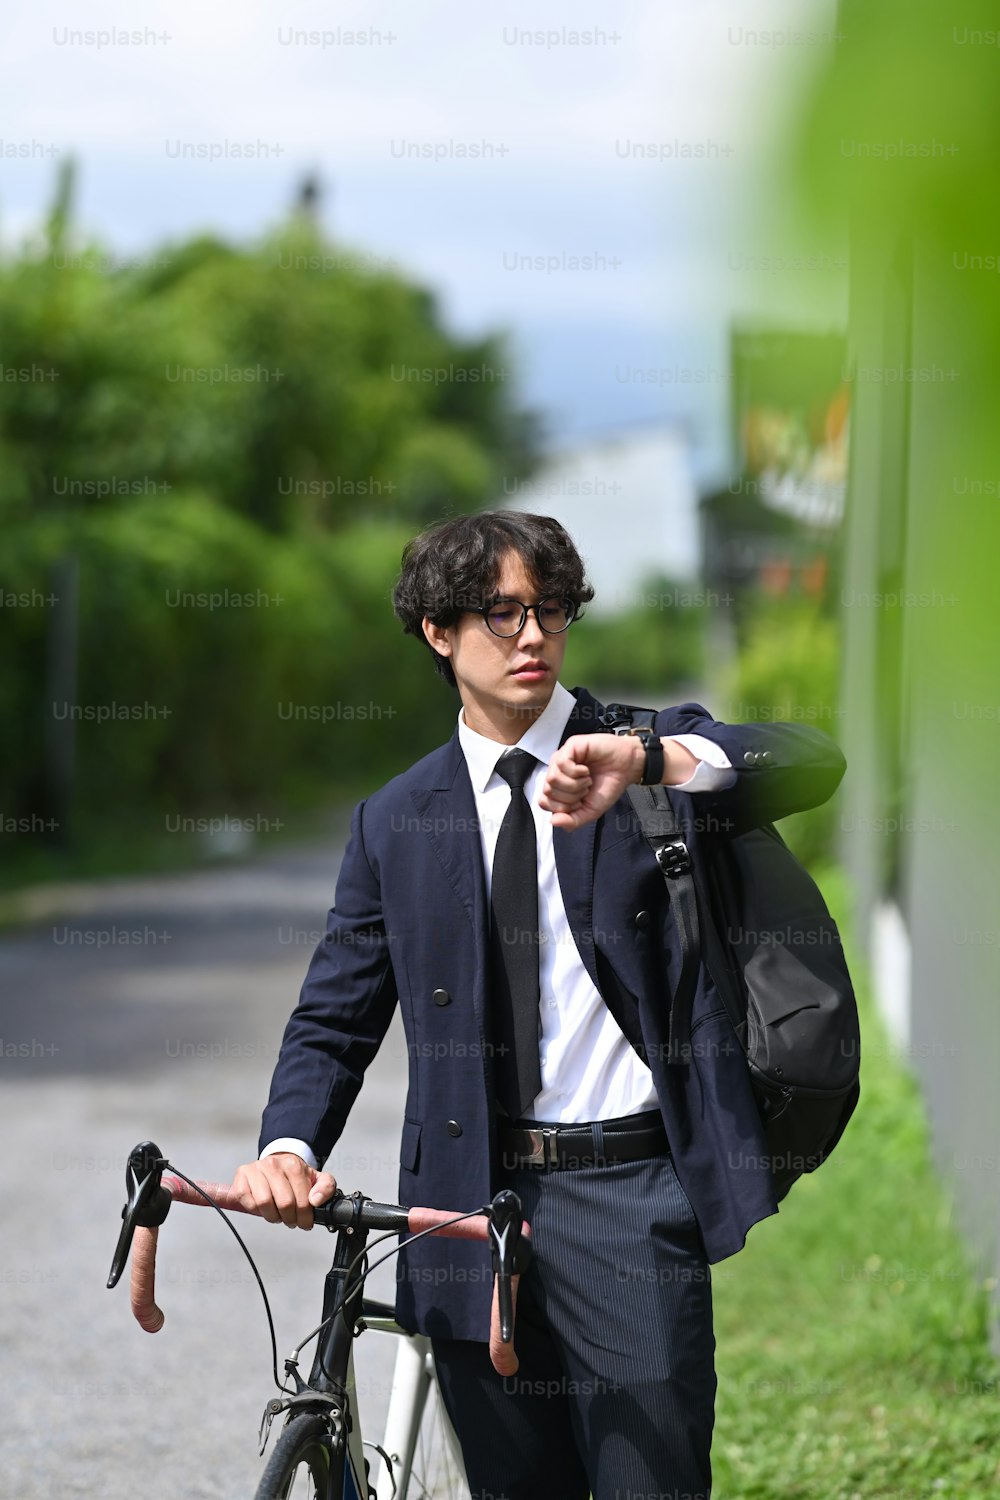 Asian businessman checking time on his wrist watch and commuting to work with bicycle.